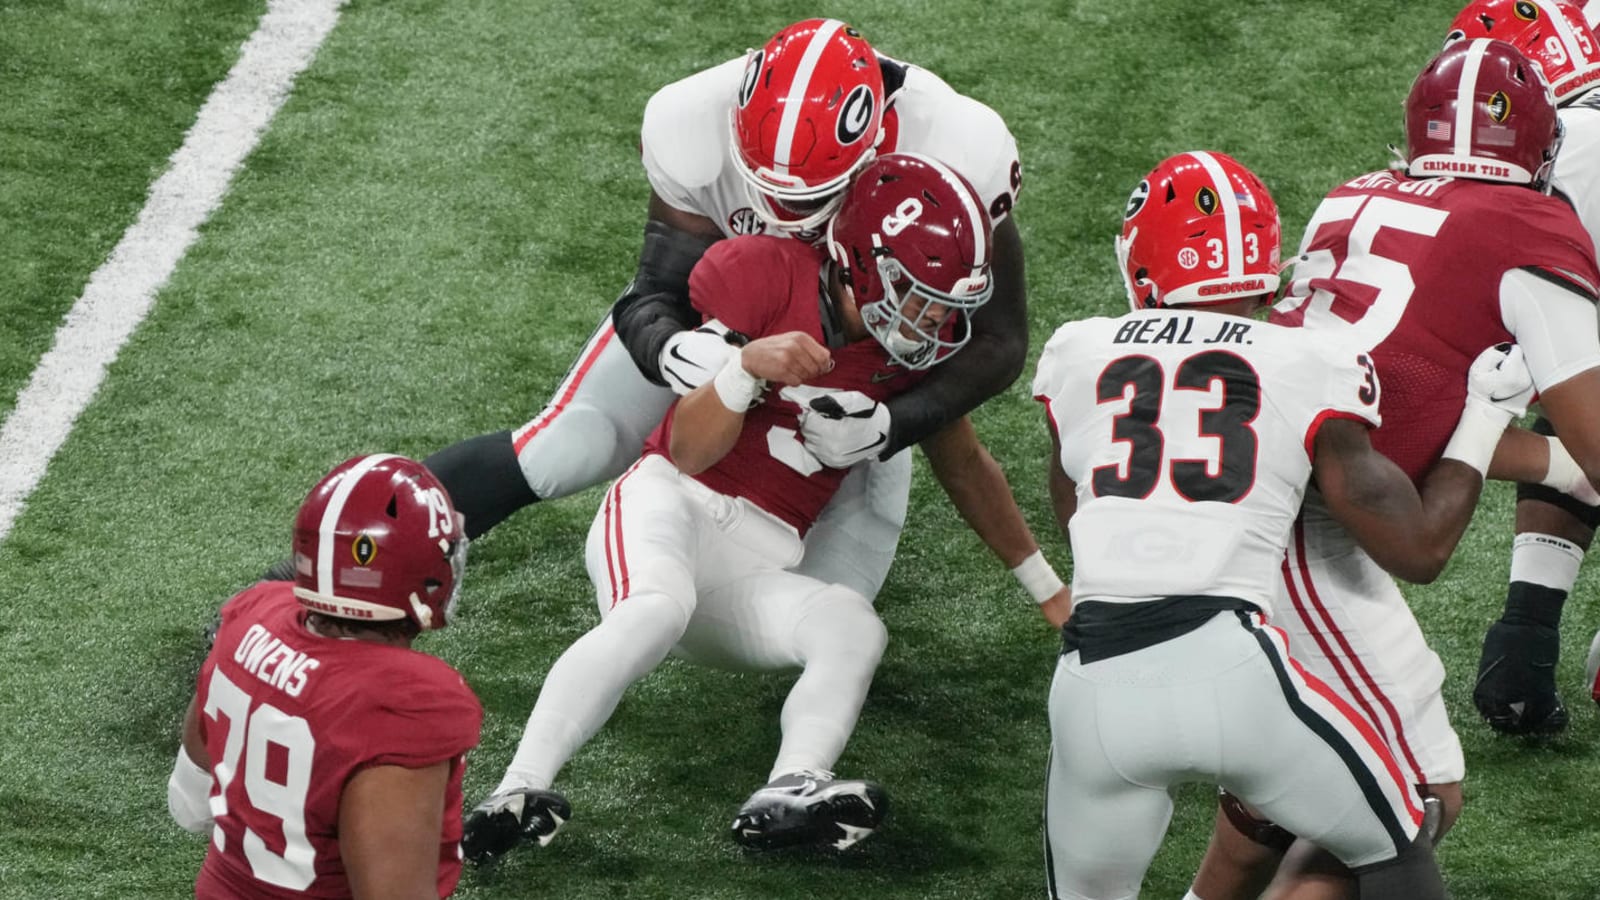 Georgia loses touchdown on overturned call to incompletion